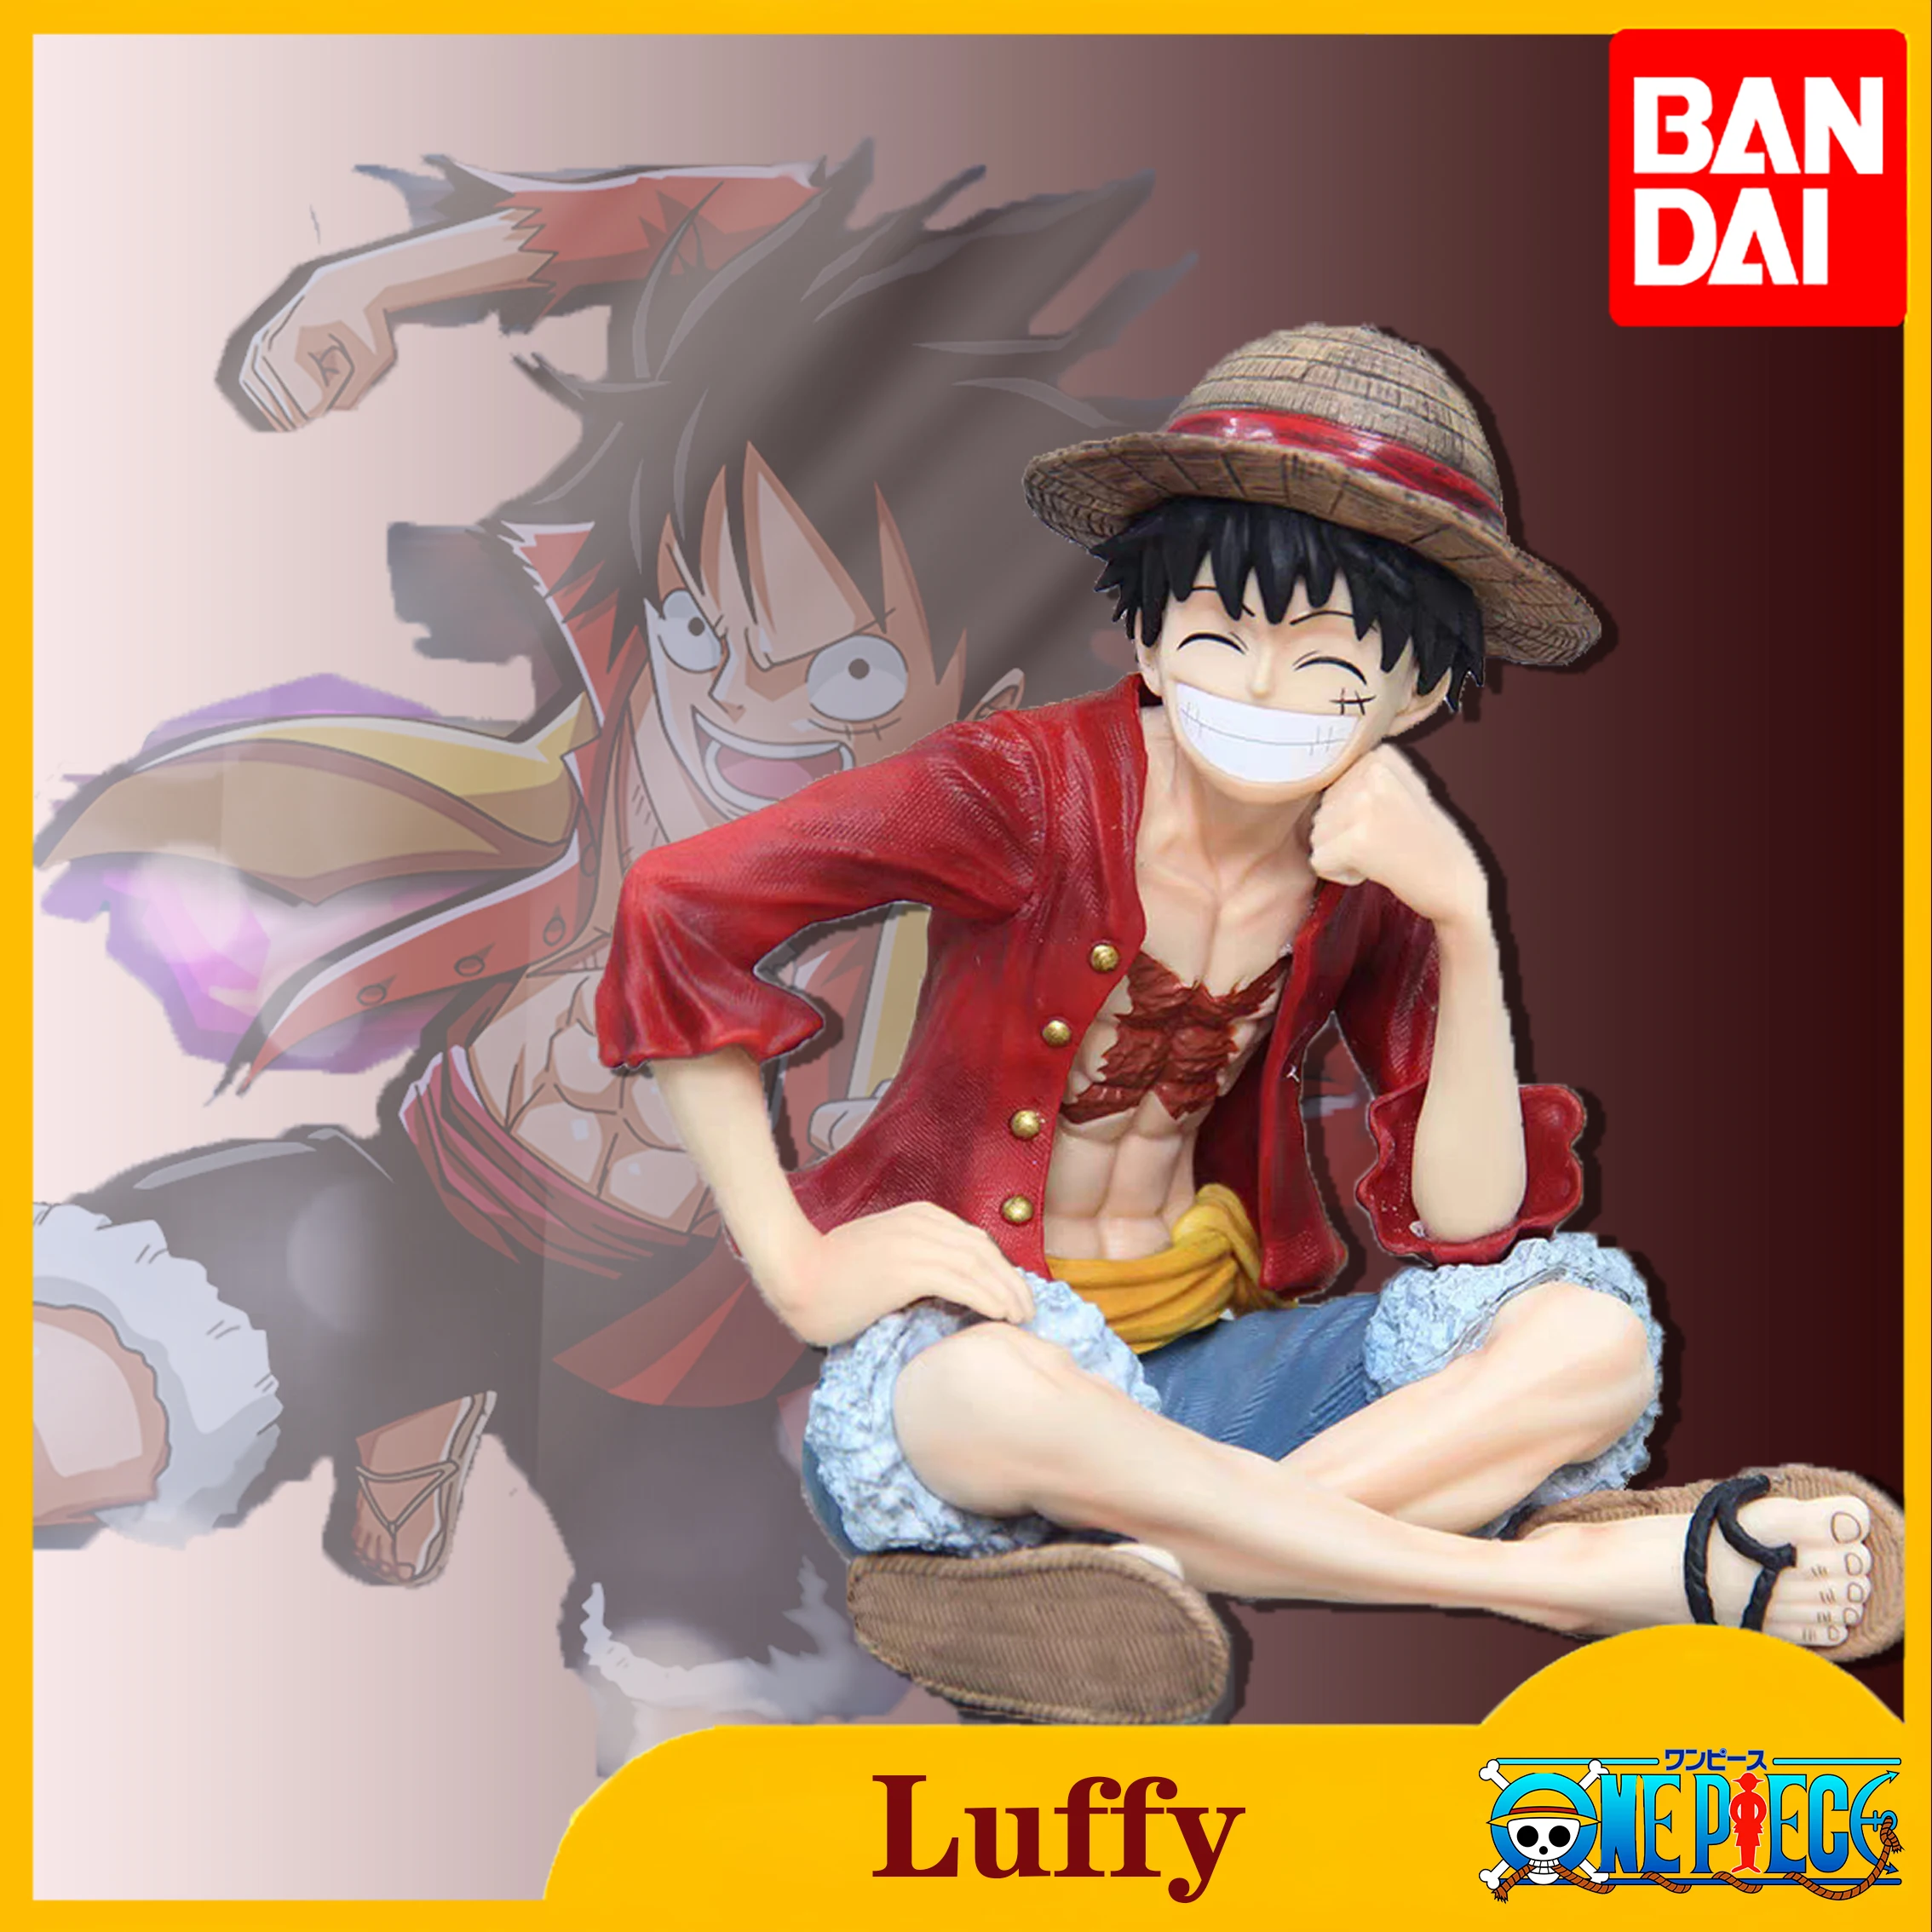 

13cm Anime One Piece Luffy Figure Monkey D. Luffy Smiley Face Action Figures PVC Collection Model Toys for Children Doll Gifts